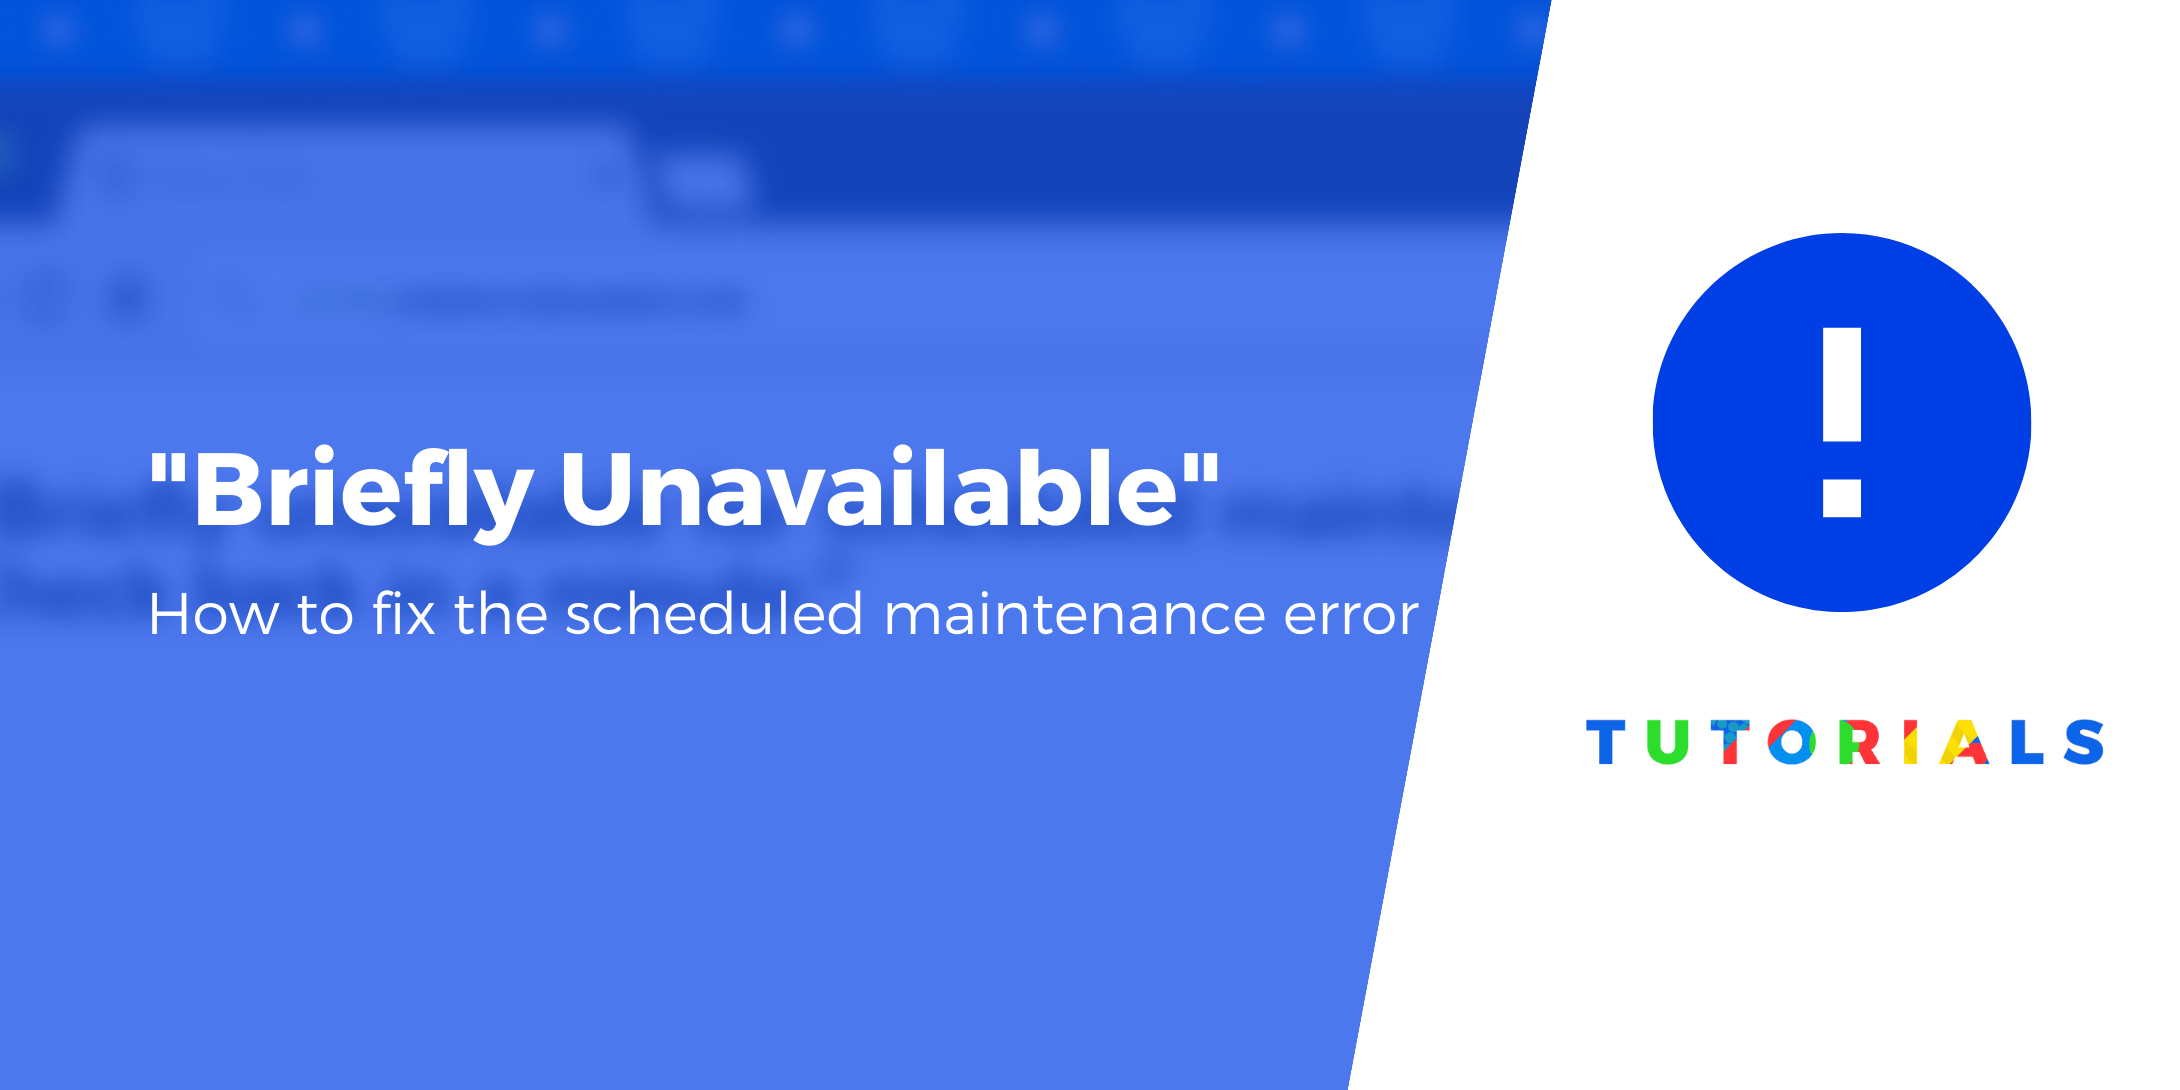 How to Fix “Briefly Unavailable For Scheduled Maintenance. Check Back in a Minute.”